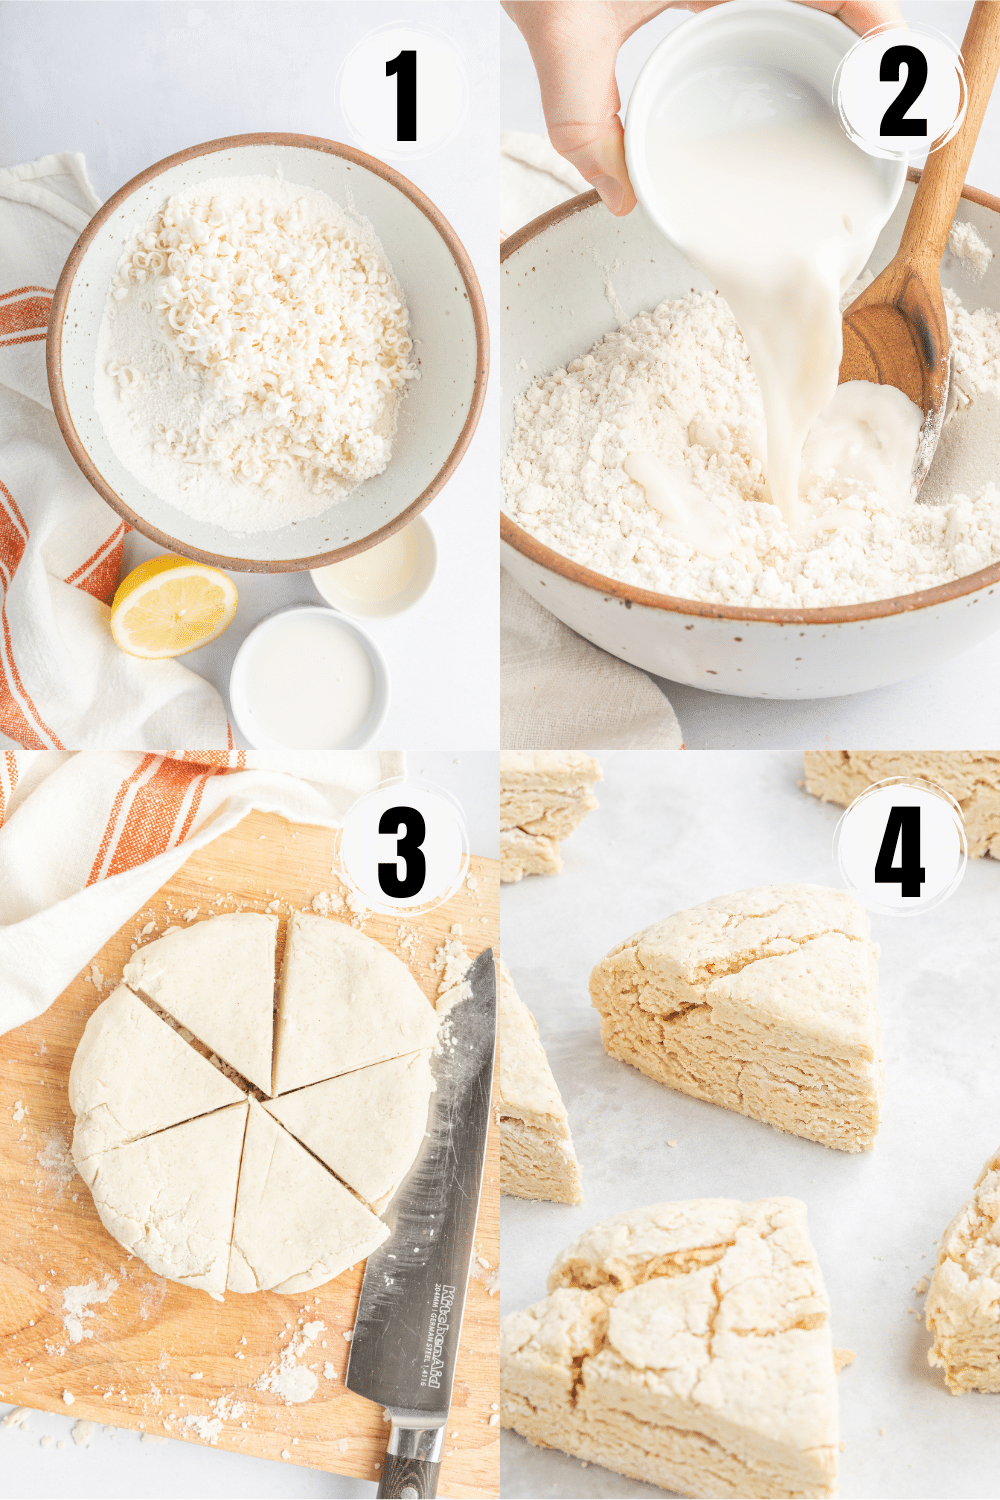 Collage of photos showing the steps to make Vegan Scones.